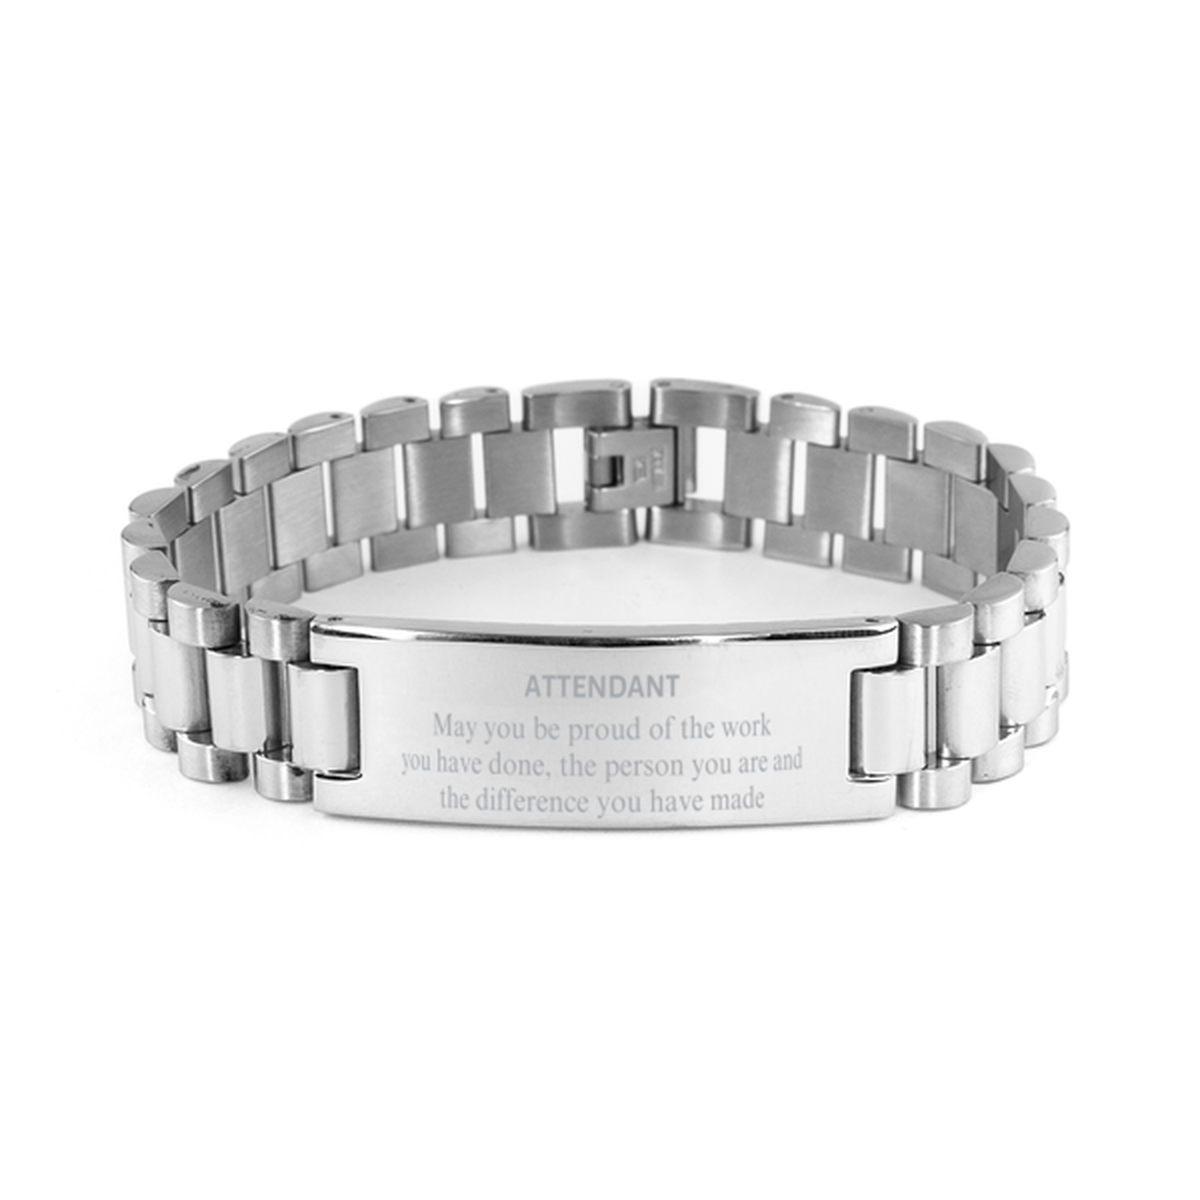 Attendant May you be proud of the work you have done, Retirement Attendant Ladder Stainless Steel Bracelet for Colleague Appreciation Gifts Amazing for Attendant